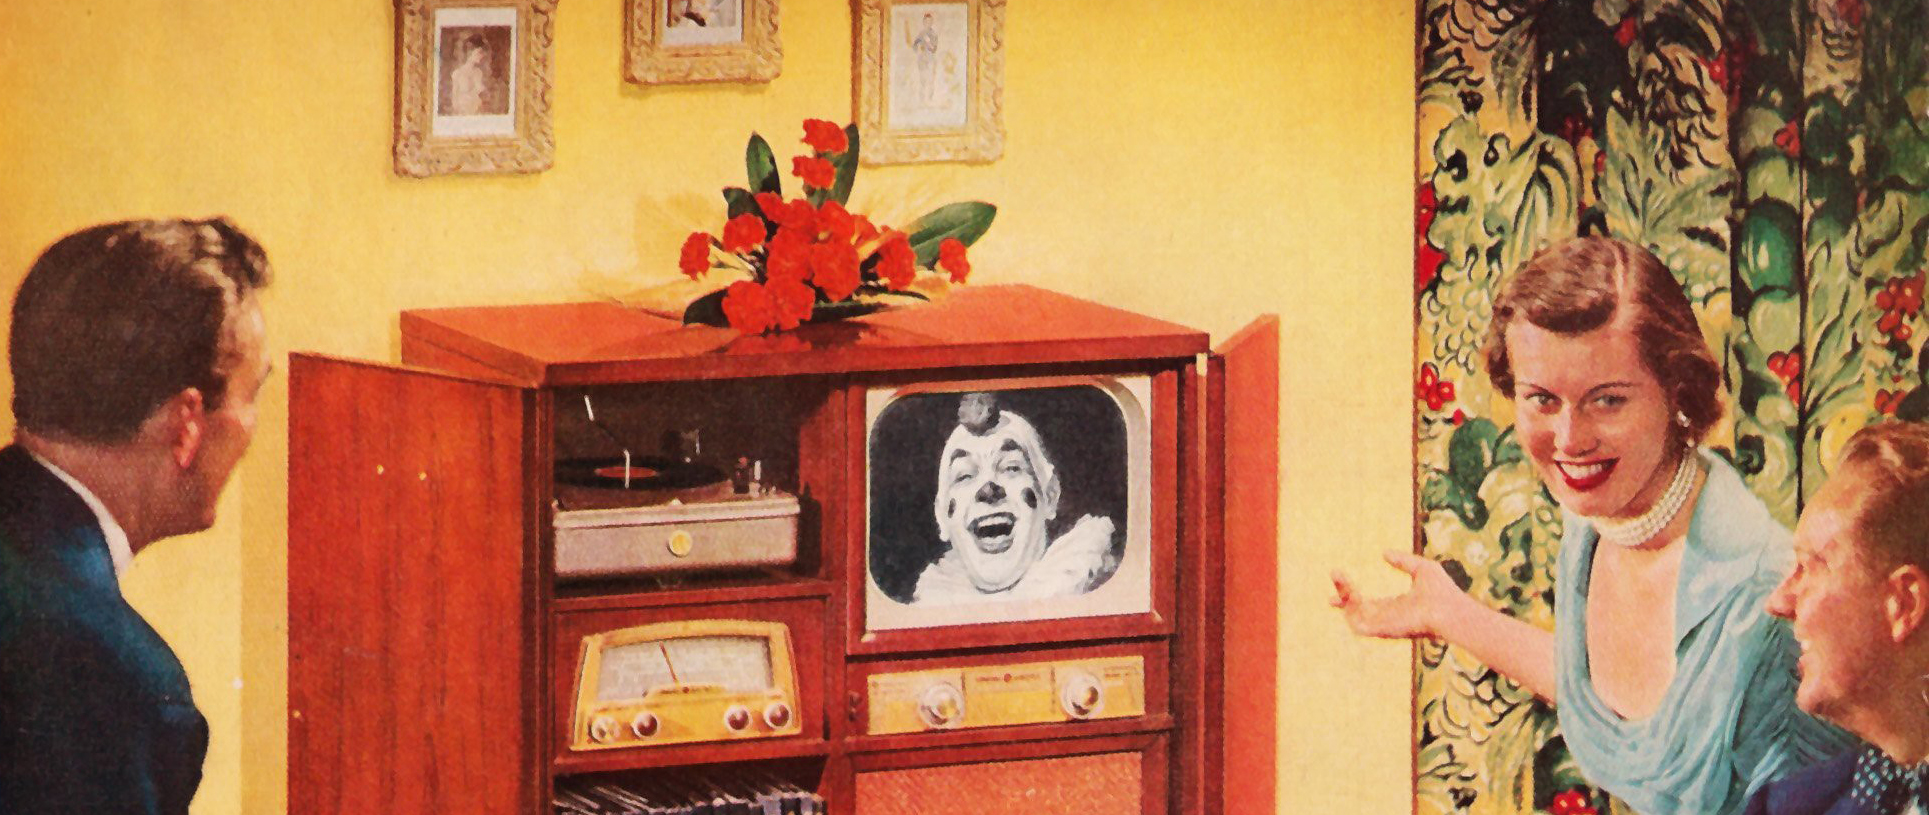 A vintage television ad where a woman shows to a group of male a TV, that has a clown on it